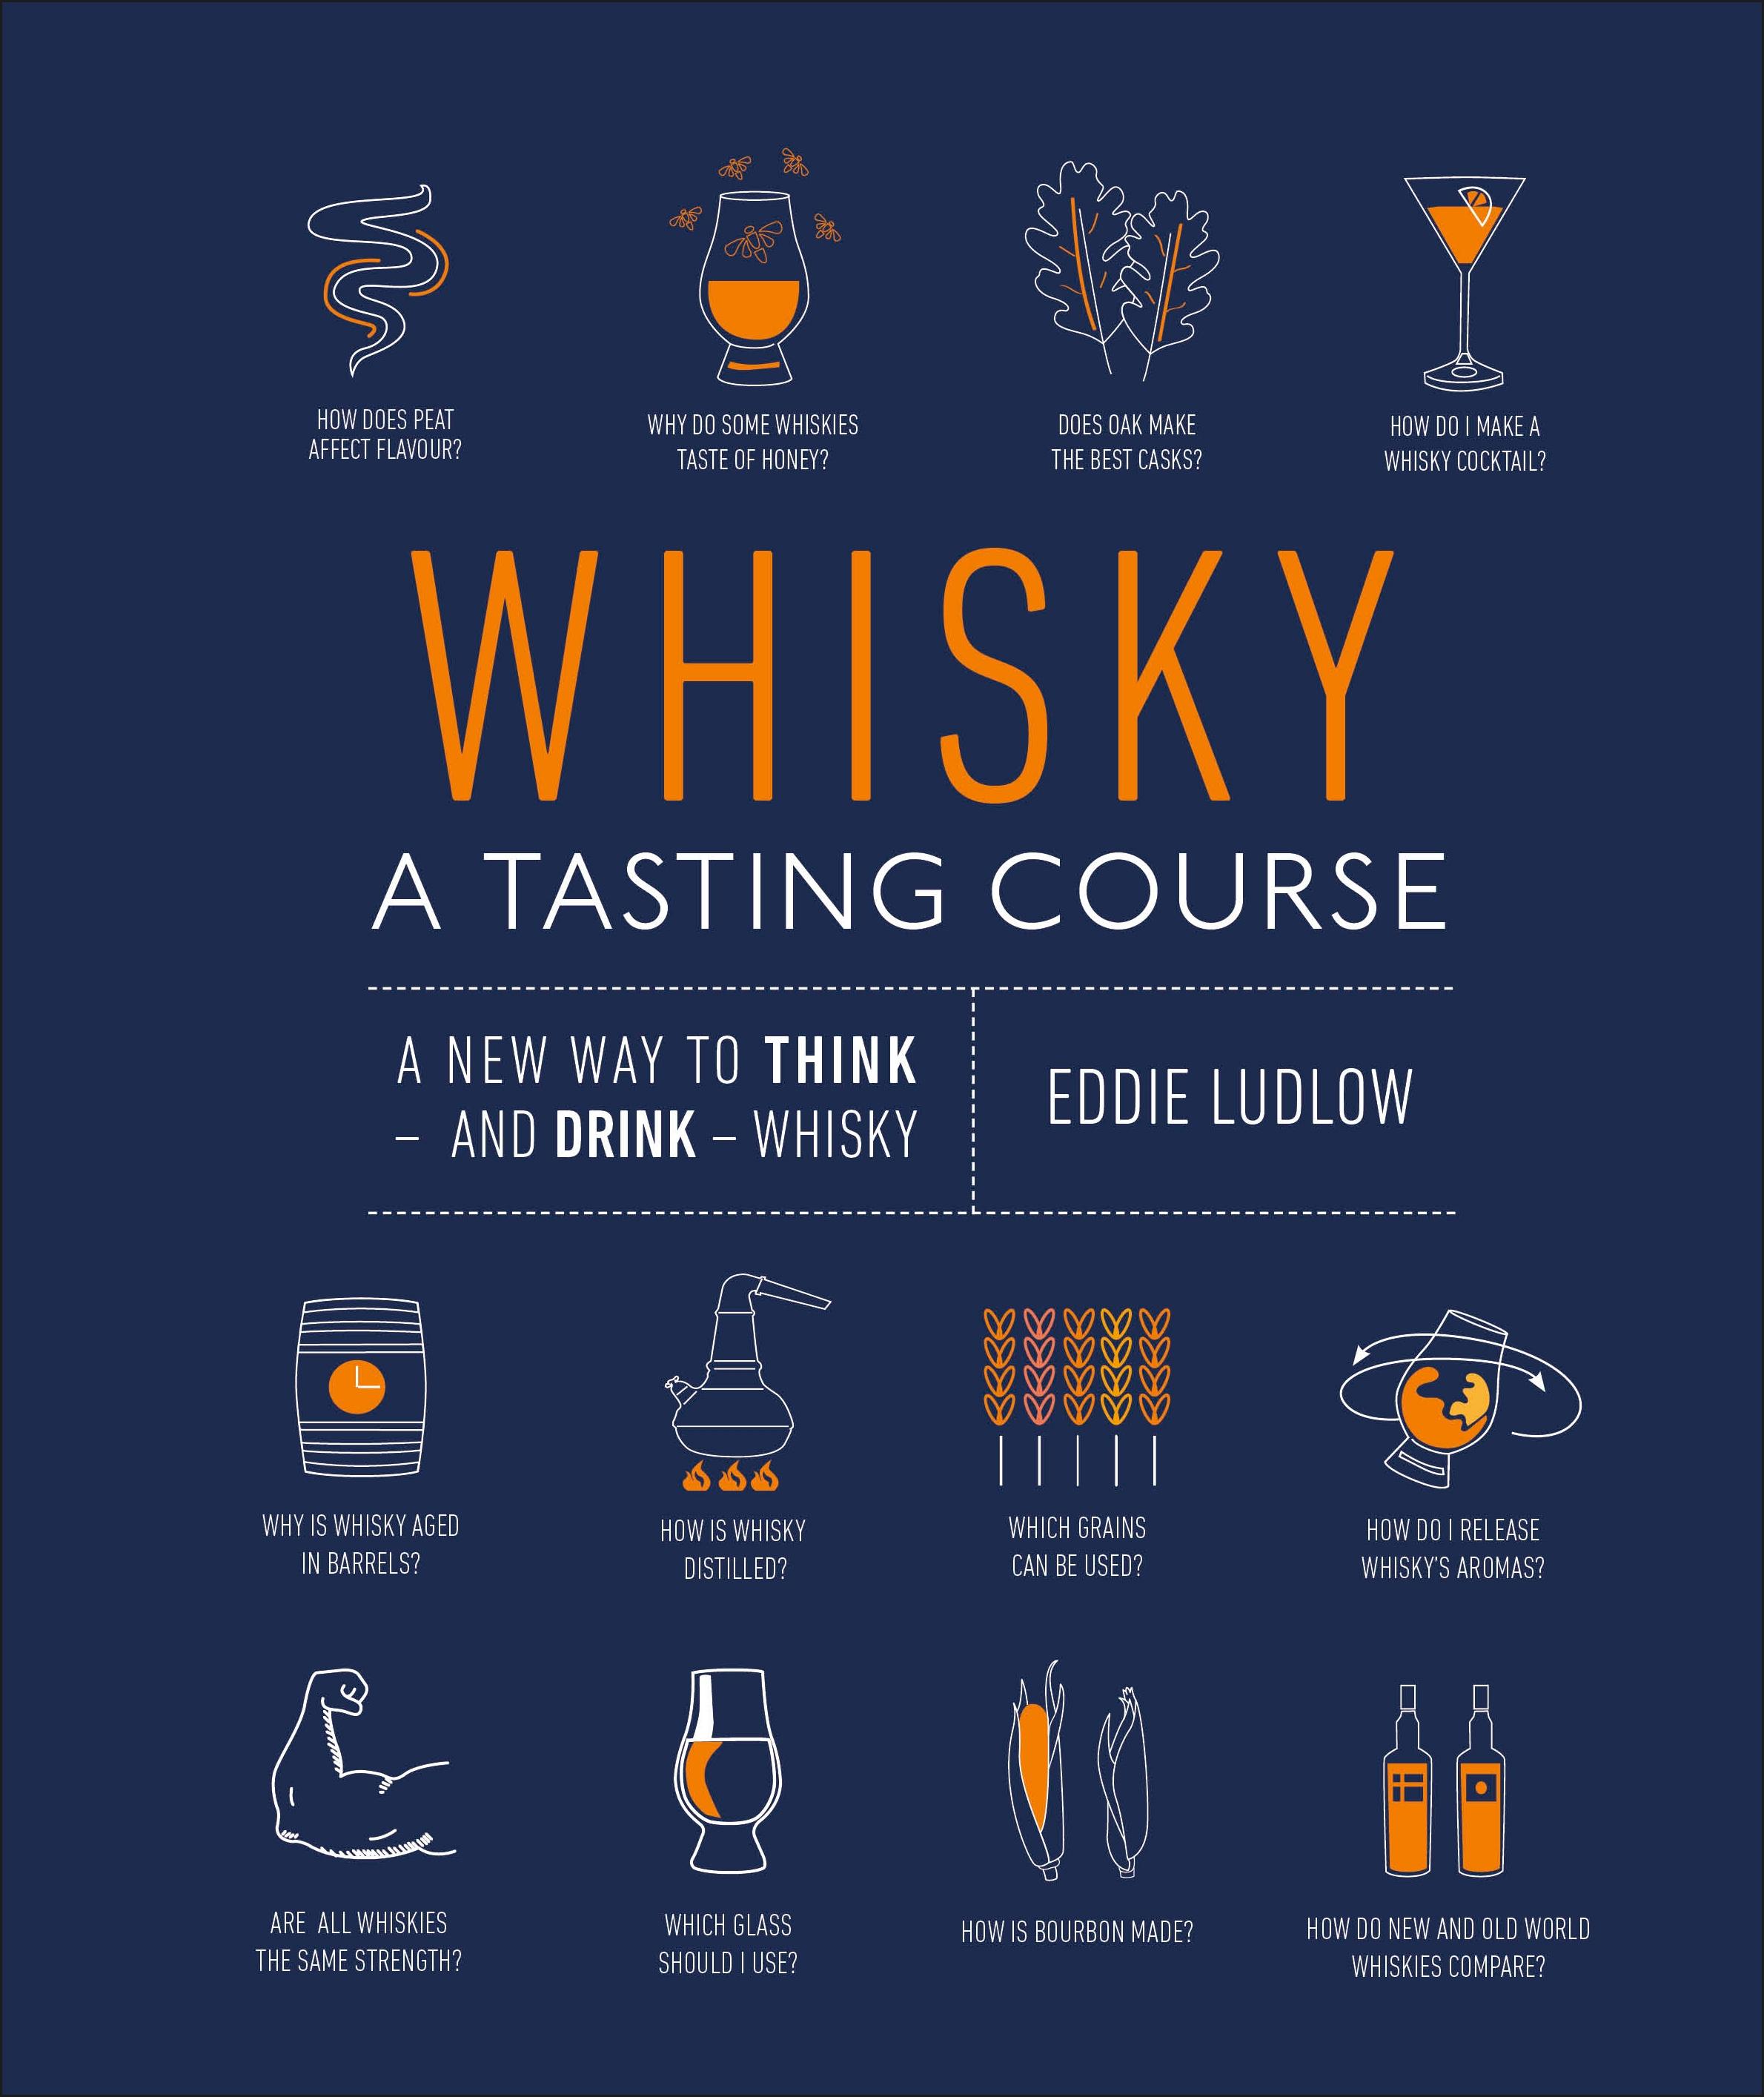 Whisky A Tasting Course / A New Way to Think - and Drink - Whisky / Eddie Ludlow / Buch / 224 S. / Englisch / 2019 / Dorling Kindersley Ltd. / EAN 9780241345214 - Ludlow, Eddie